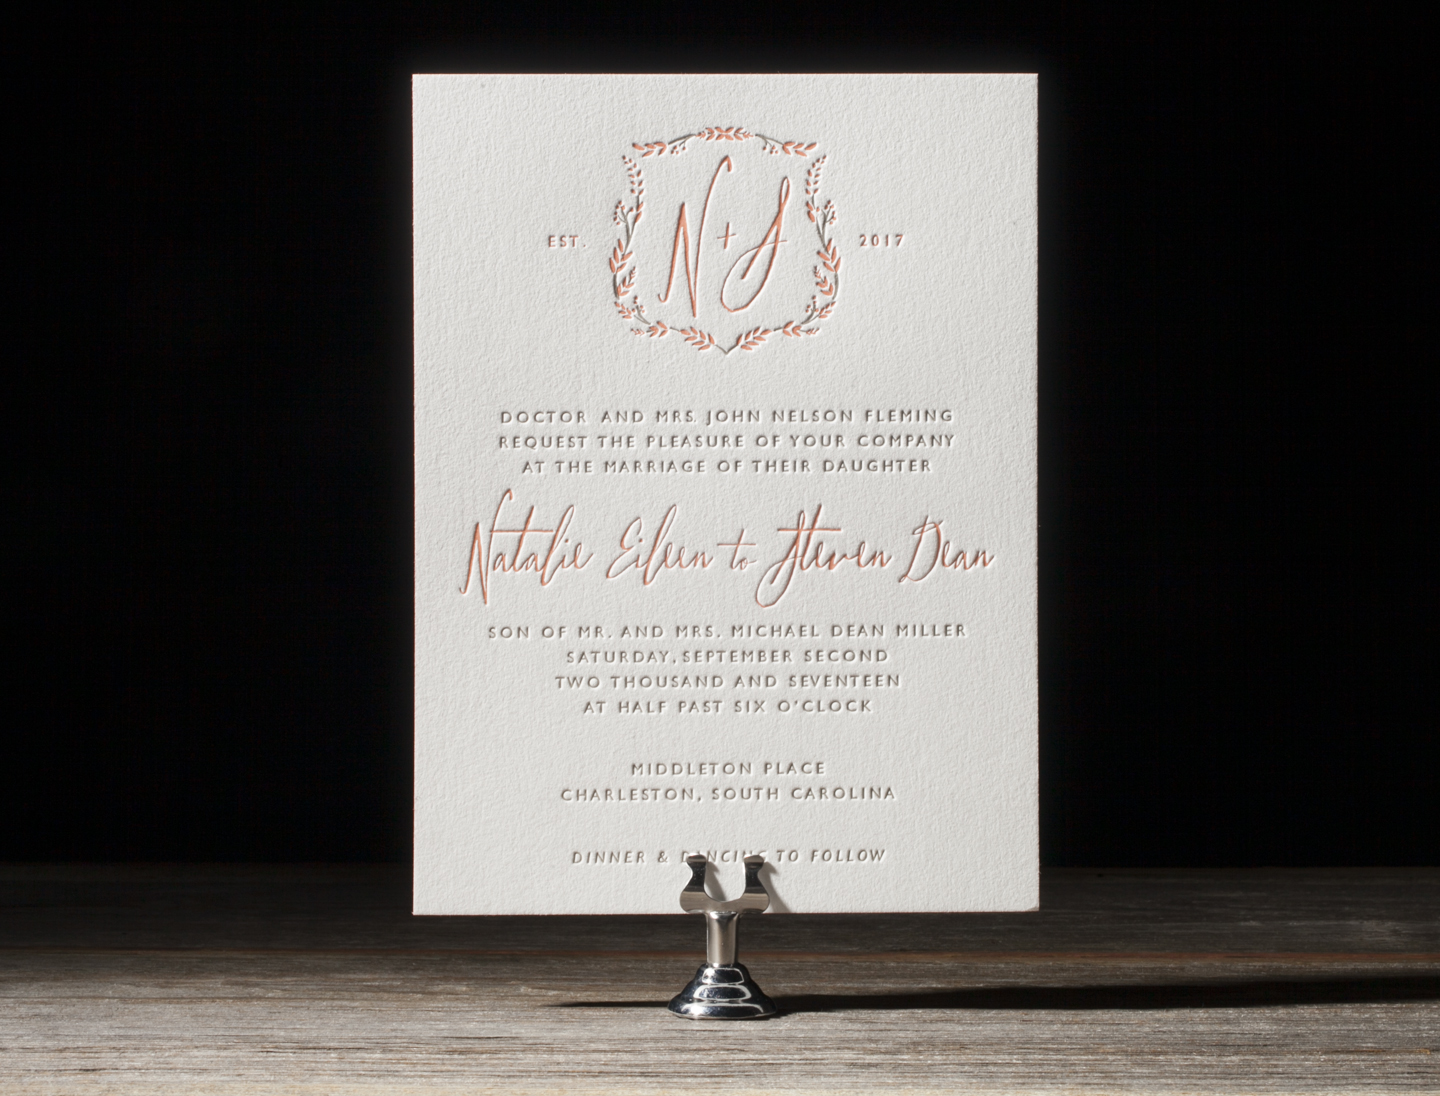 Wreath Crest Letterpress Wedding Stationery from Bella Figura's 2014 Collection